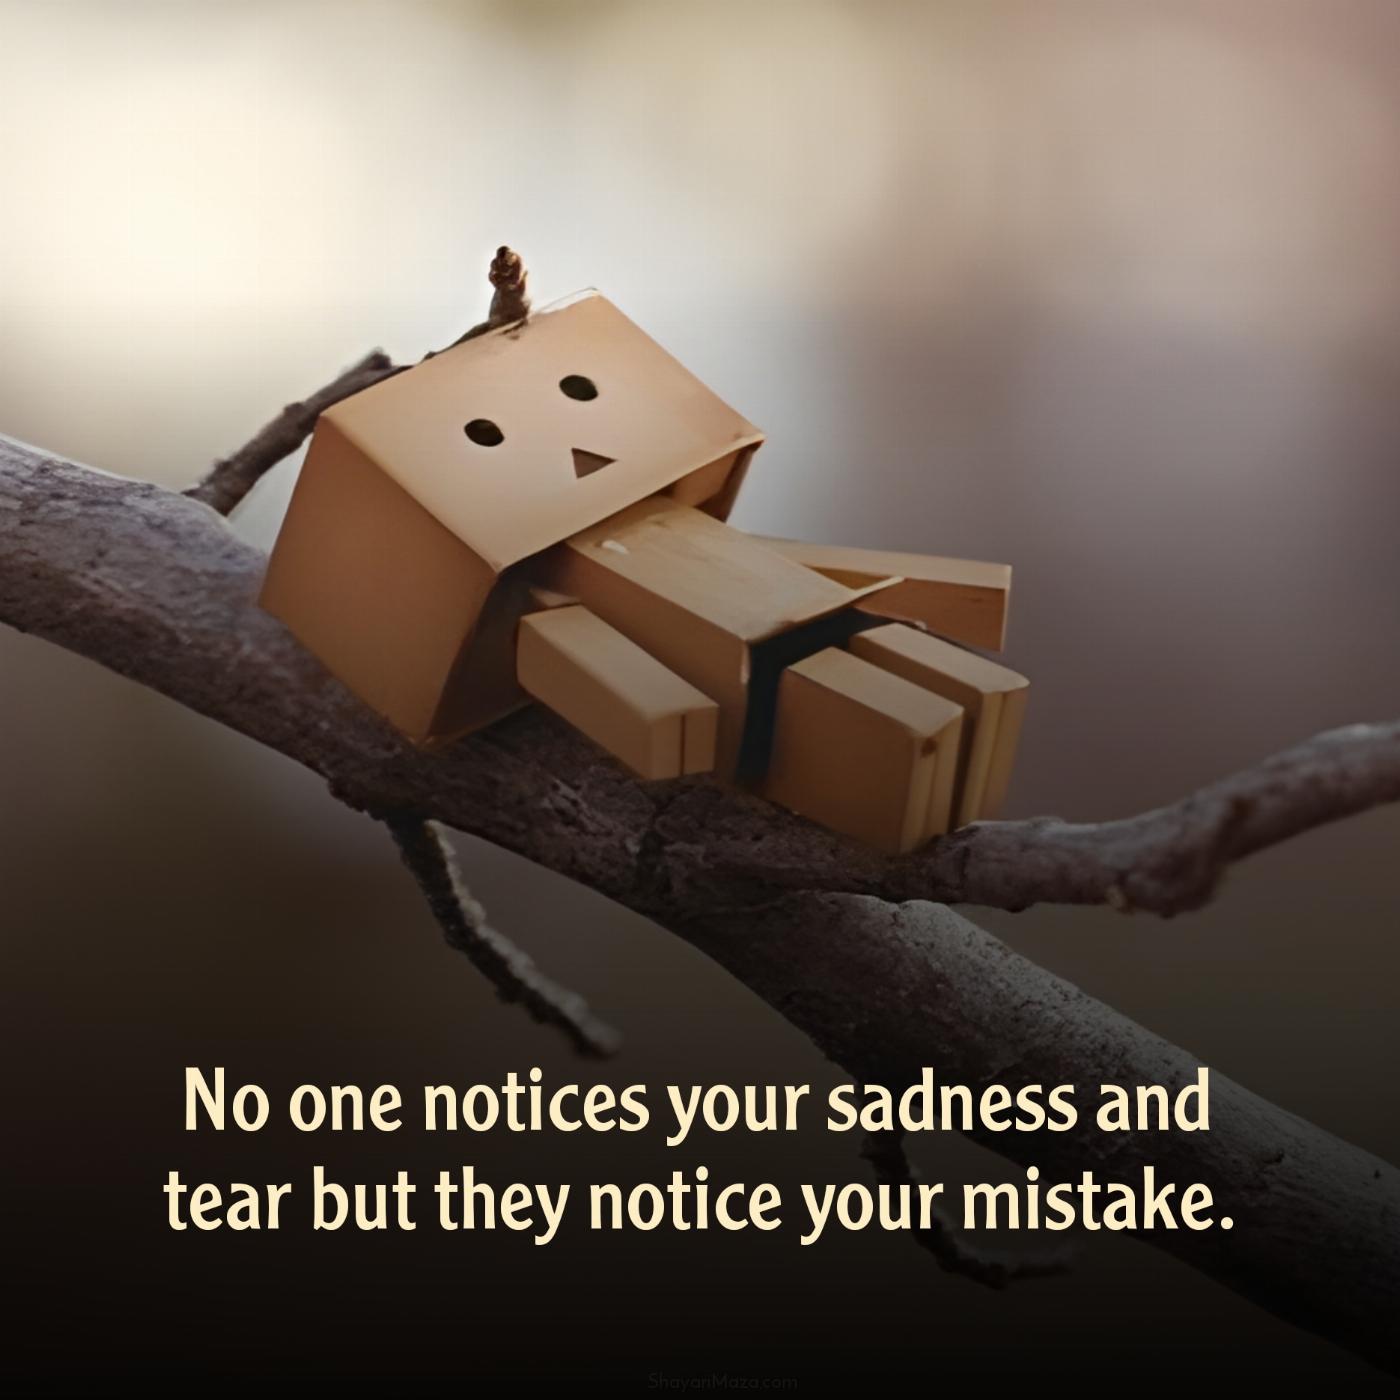 No one notices your sadness and tear but they notice your mistake